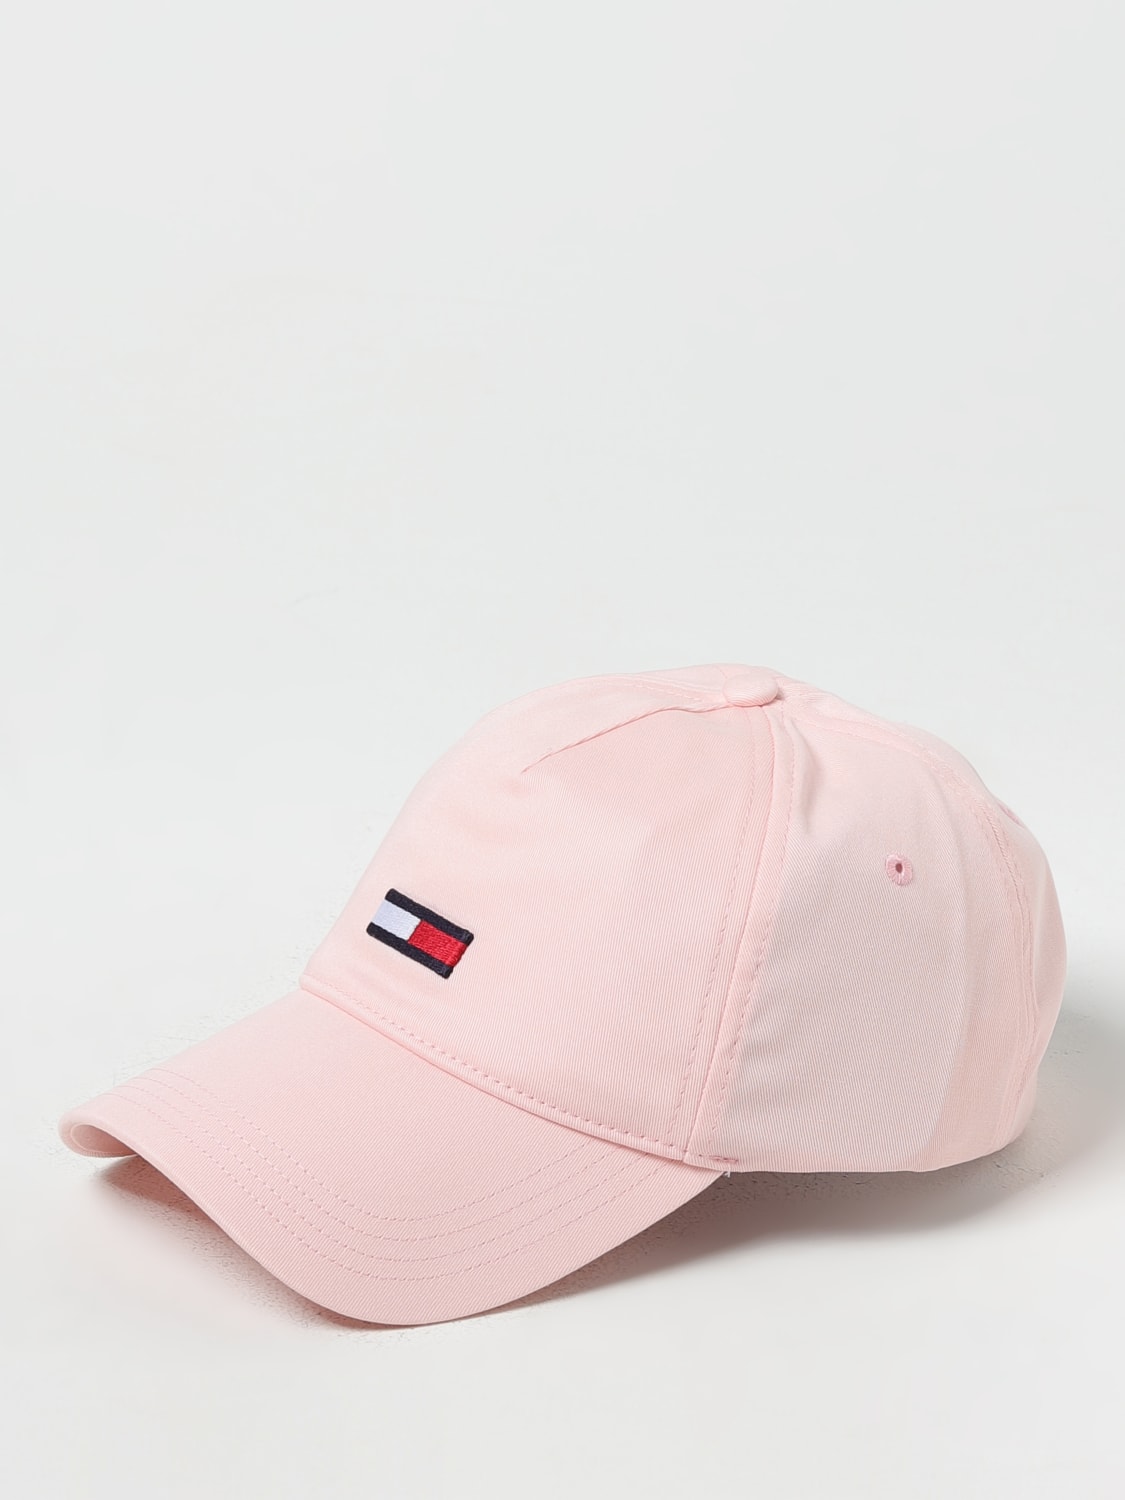 TOMMY HILFIGER: hat hat at - AW0AW14986 Hilfiger | Tommy Pink for online women